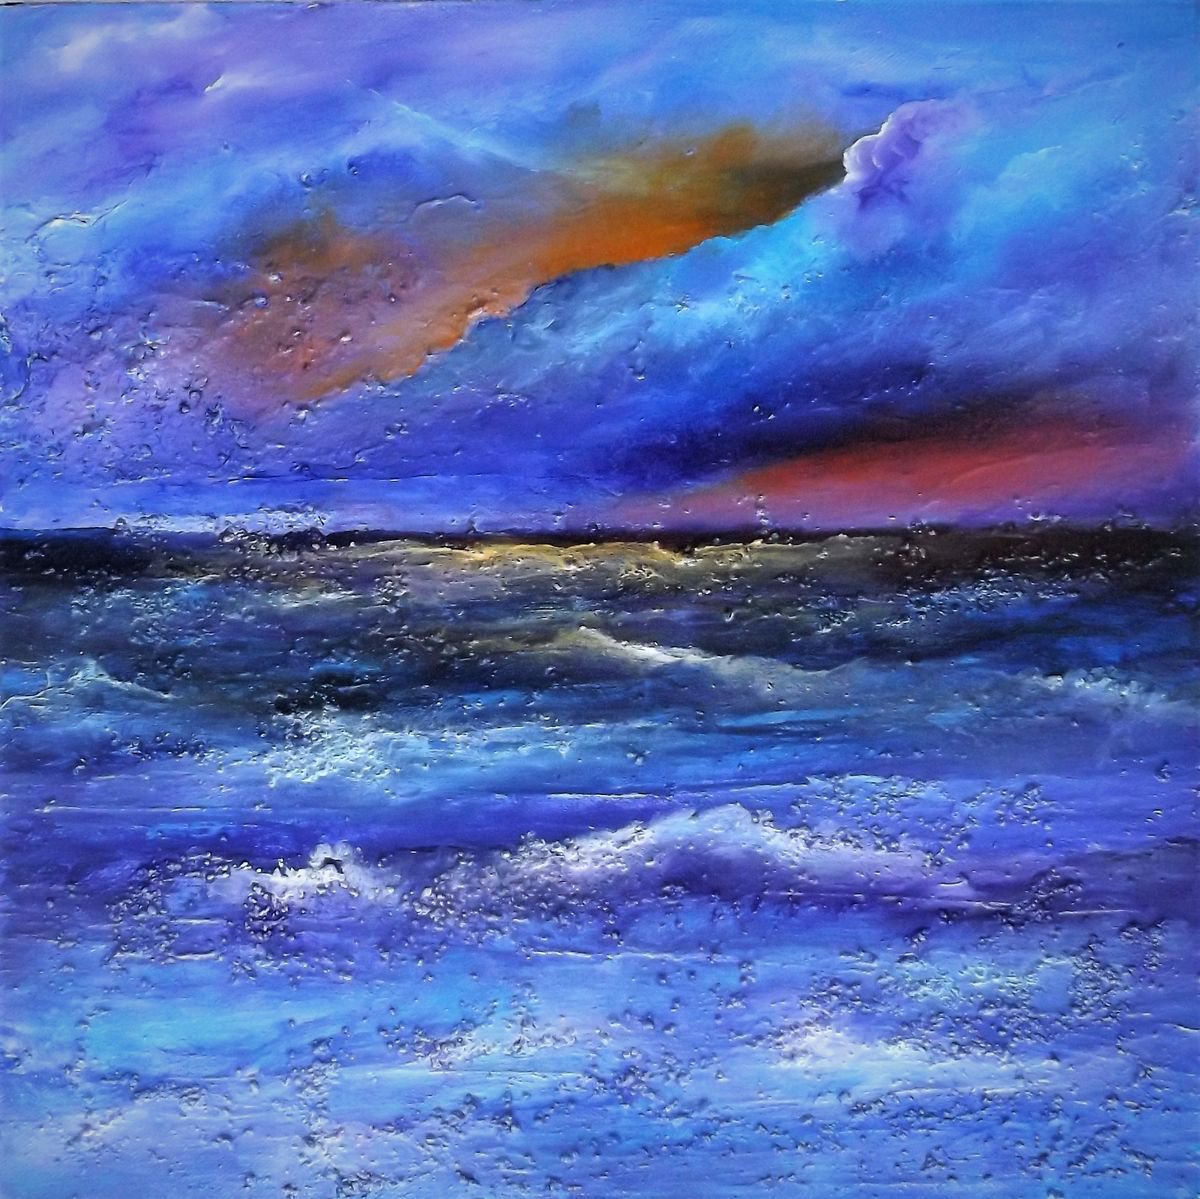 Horizon - Textured Clouds and Sea by Lisa Price